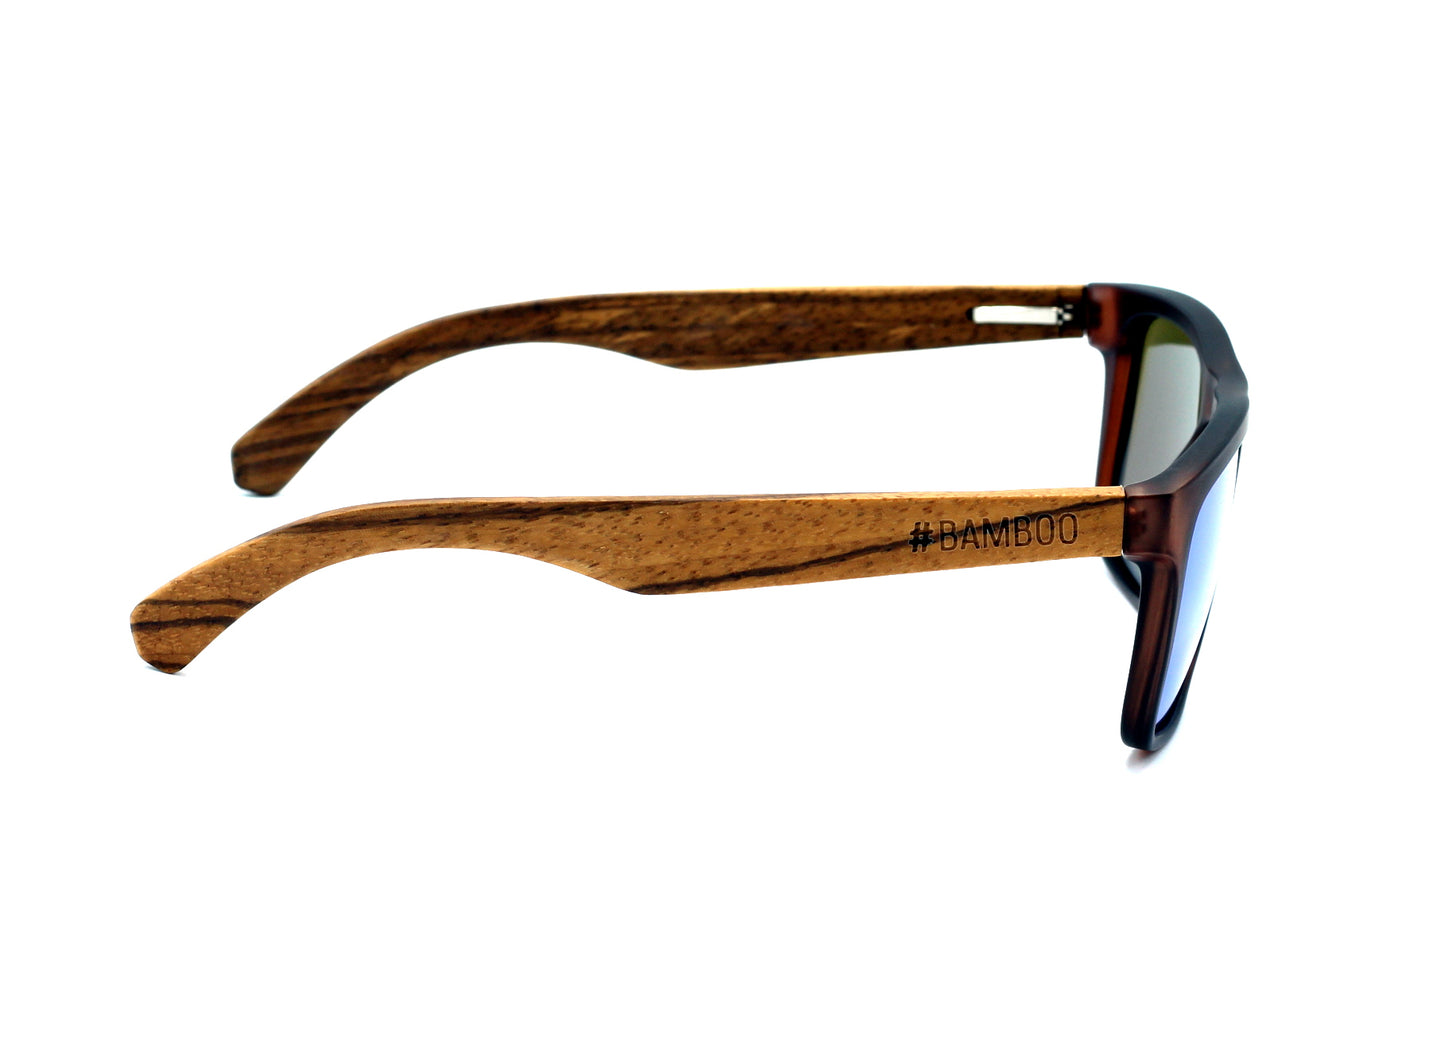 MANSHADY Opaque Brown Sunglasses Green Mirror Polarised Lens Wooden Arms - Hashtag Bamboo